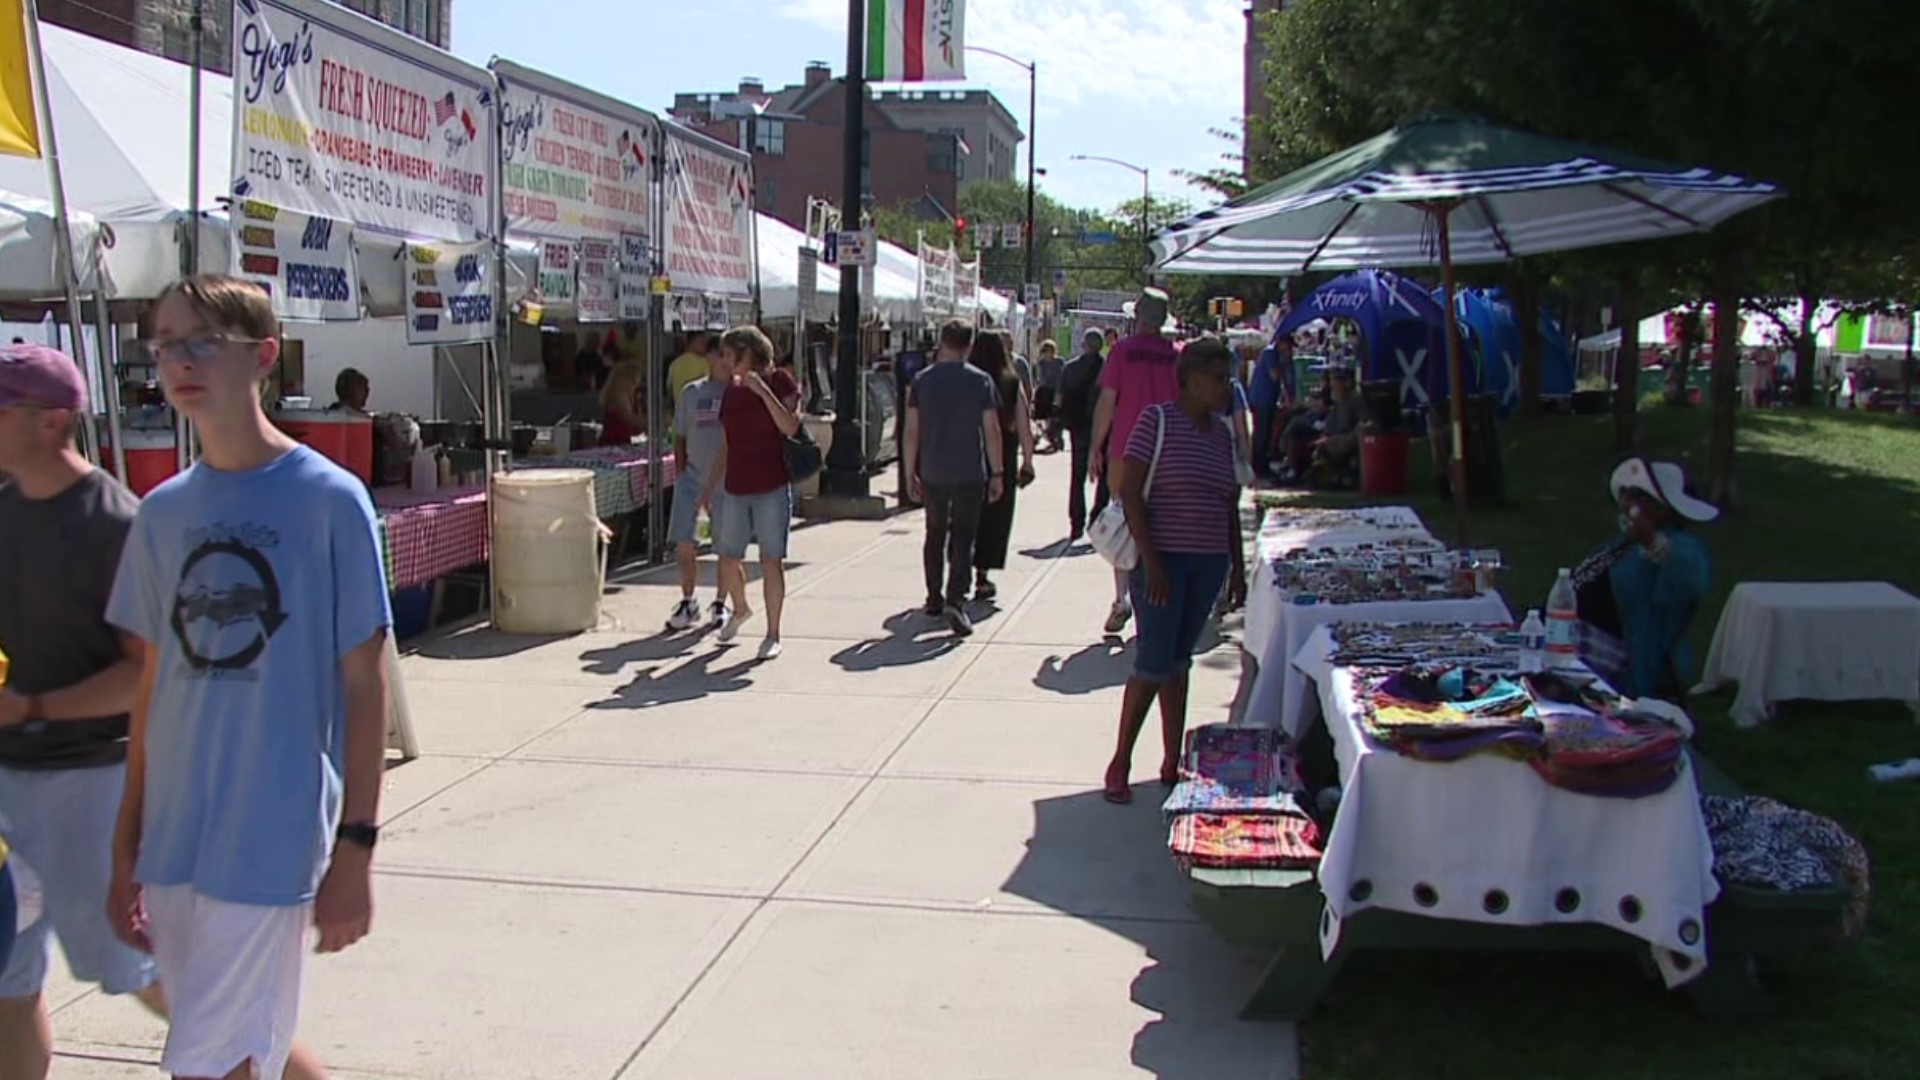 The weather is just about as hot as the food being served up at La Festa Italiana in Scranton.